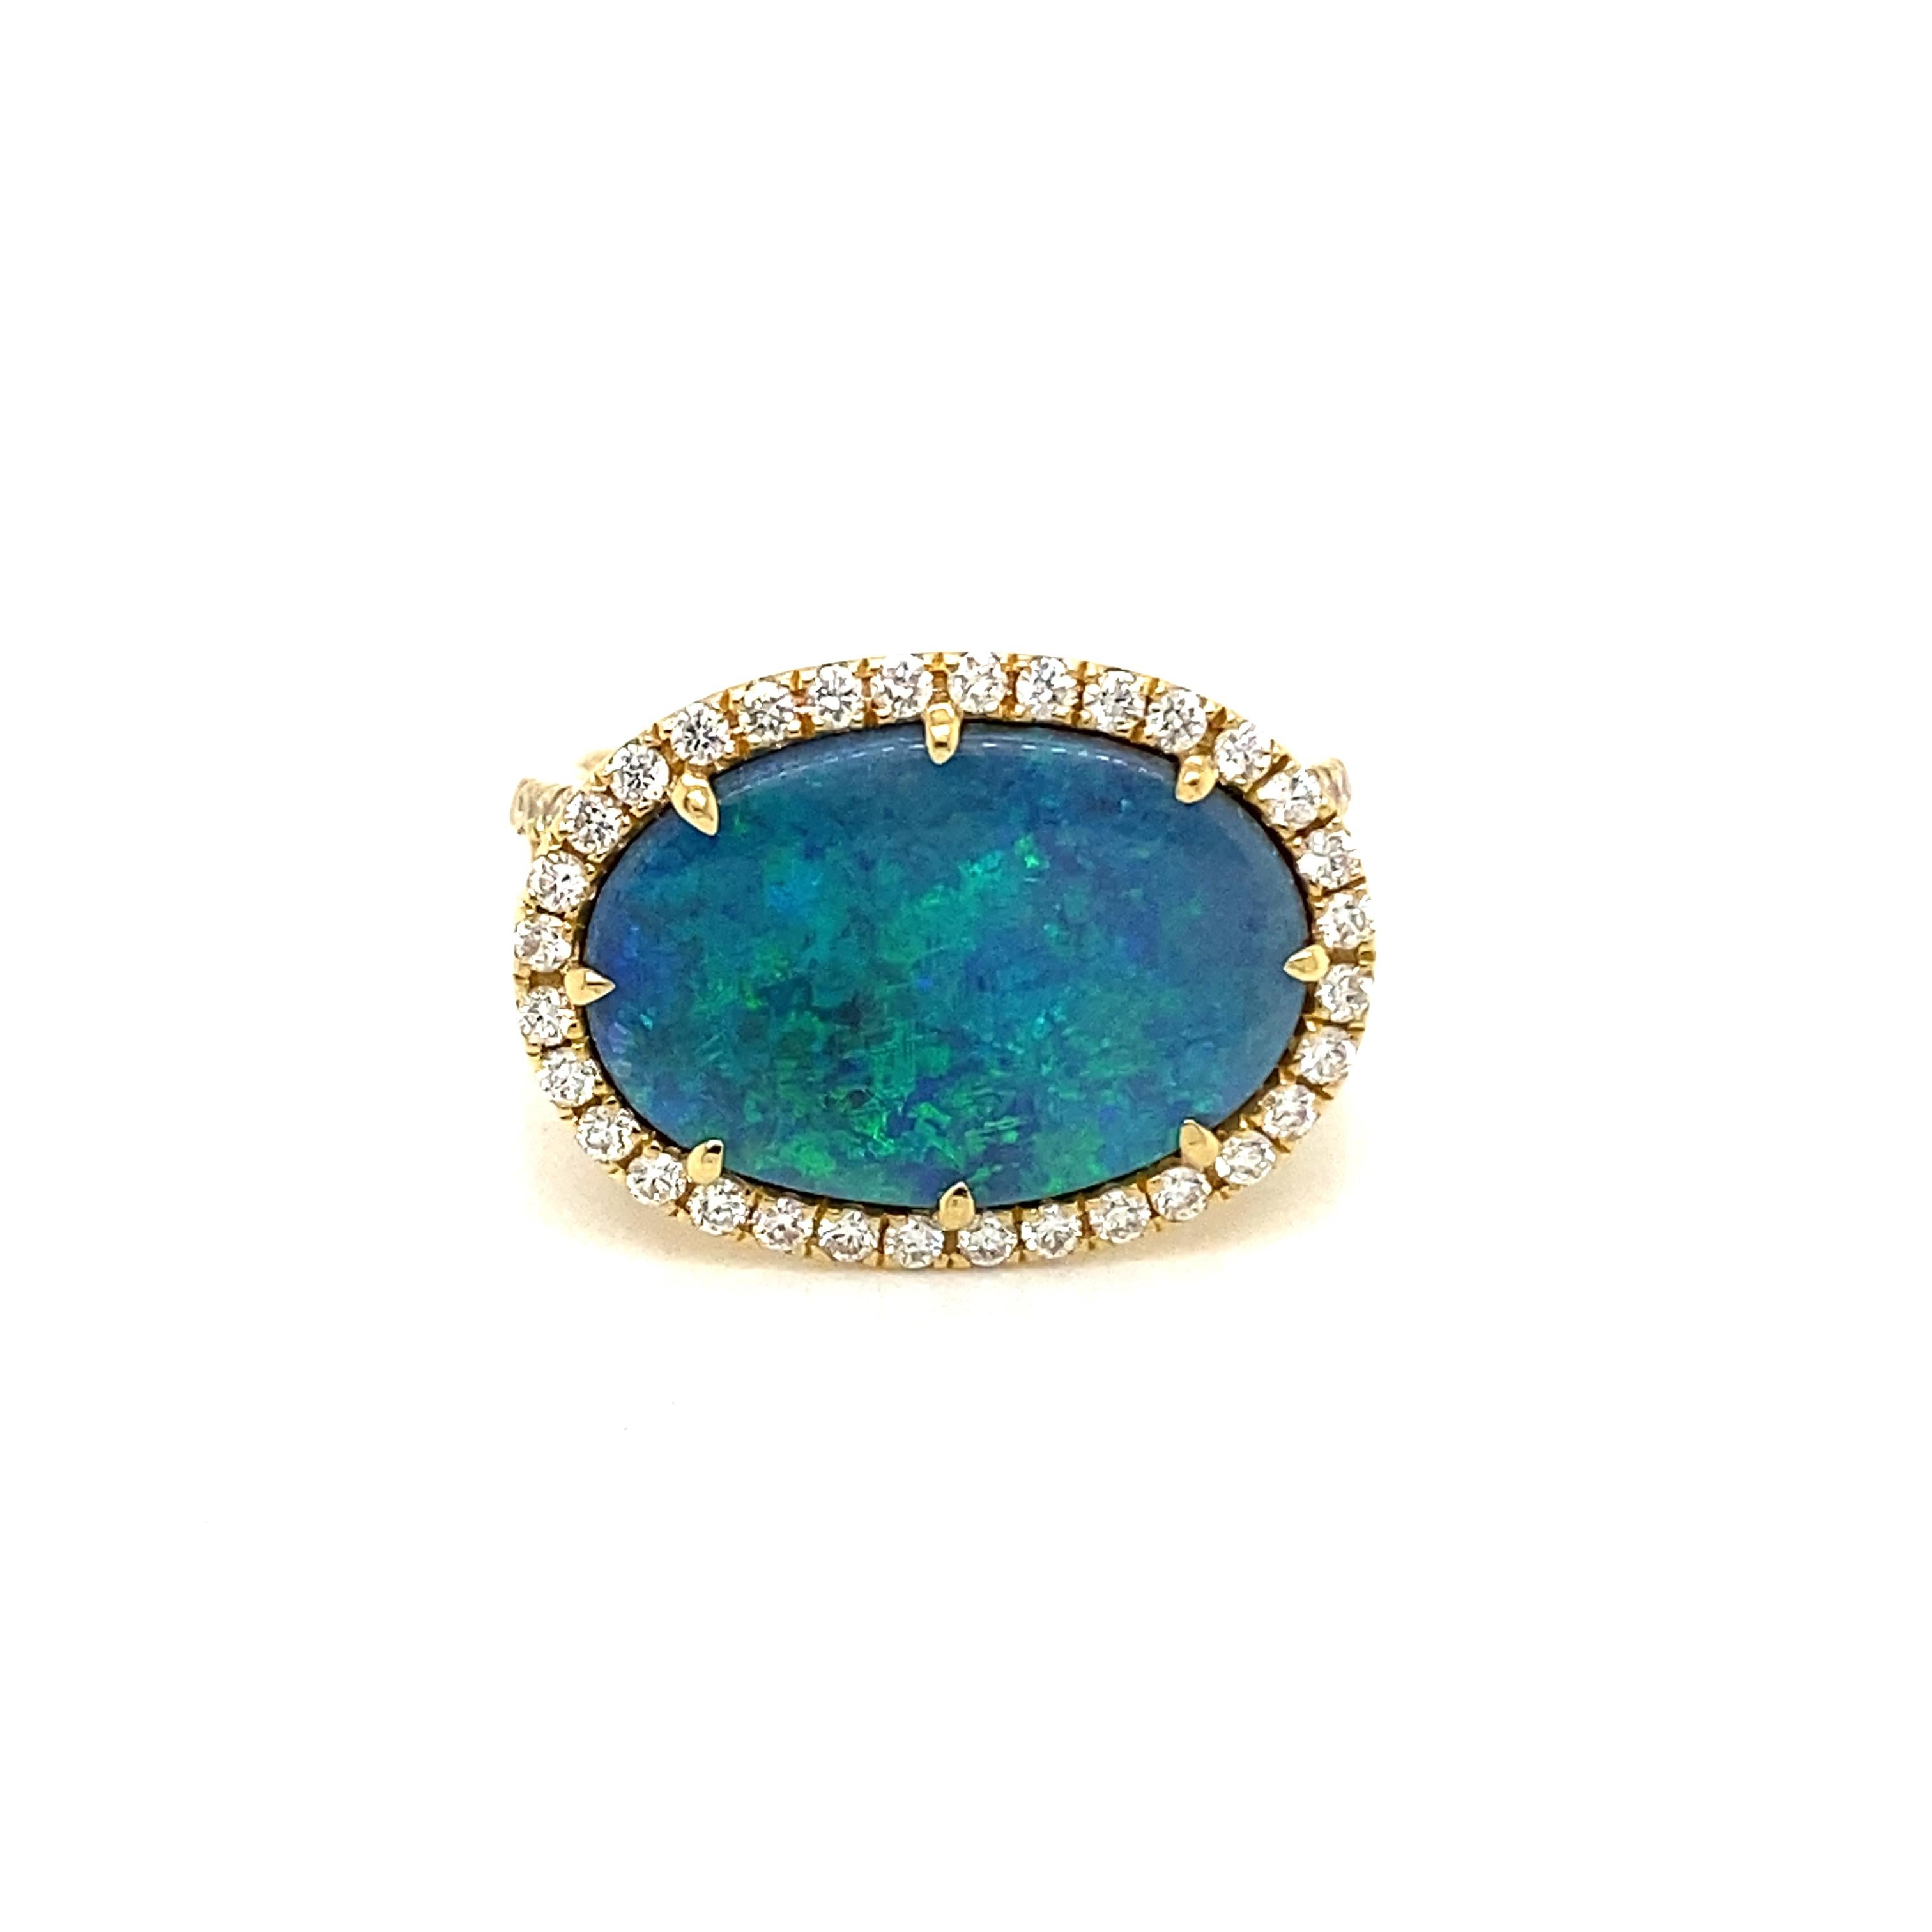 This stunning cocktail ring showcases a beautiful 3.43 Carat Lightning Ridge Oval Black Opal with a Diamond Halo on a Double Diamond Shank. This ring is set in 18K Yellow Gold, with 18K Yellow Hold prongs on the center stone.
Total Diamond Weight =